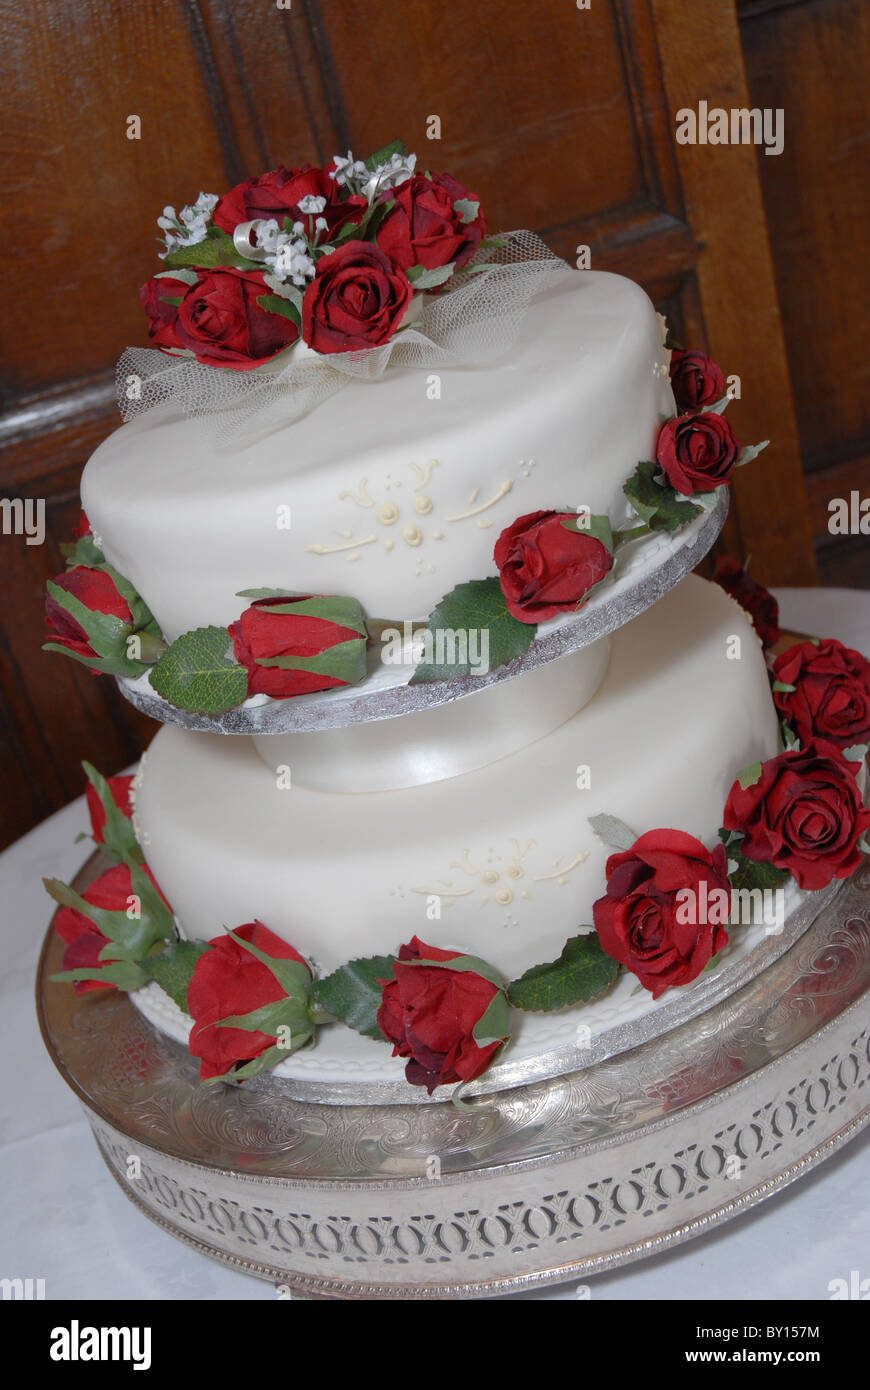 https://c8.alamy.com/comp/BY157M/two-tier-wedding-cake-decorated-with-deep-red-roses-BY157M.jpg